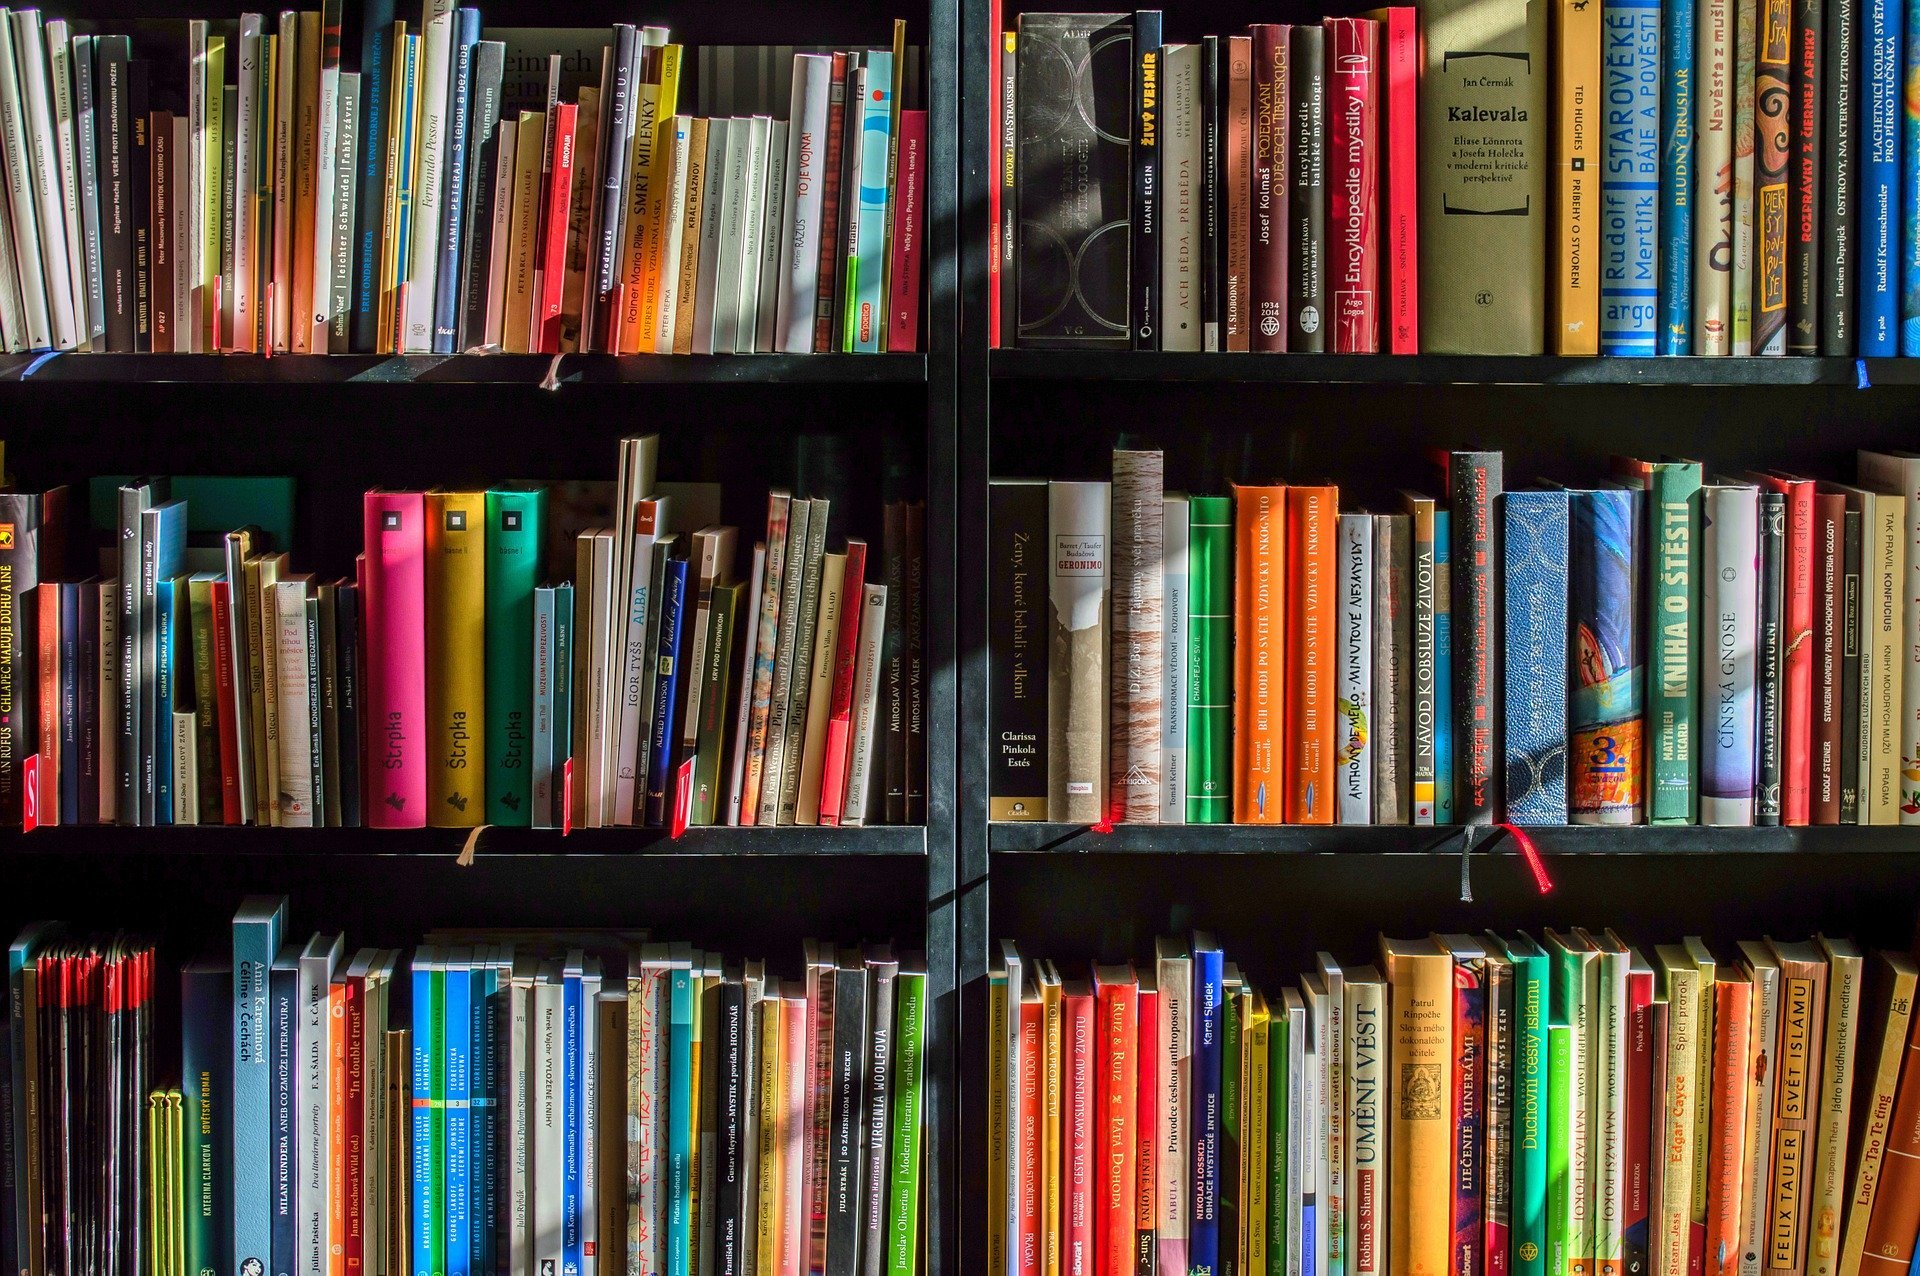 Stock image of library books